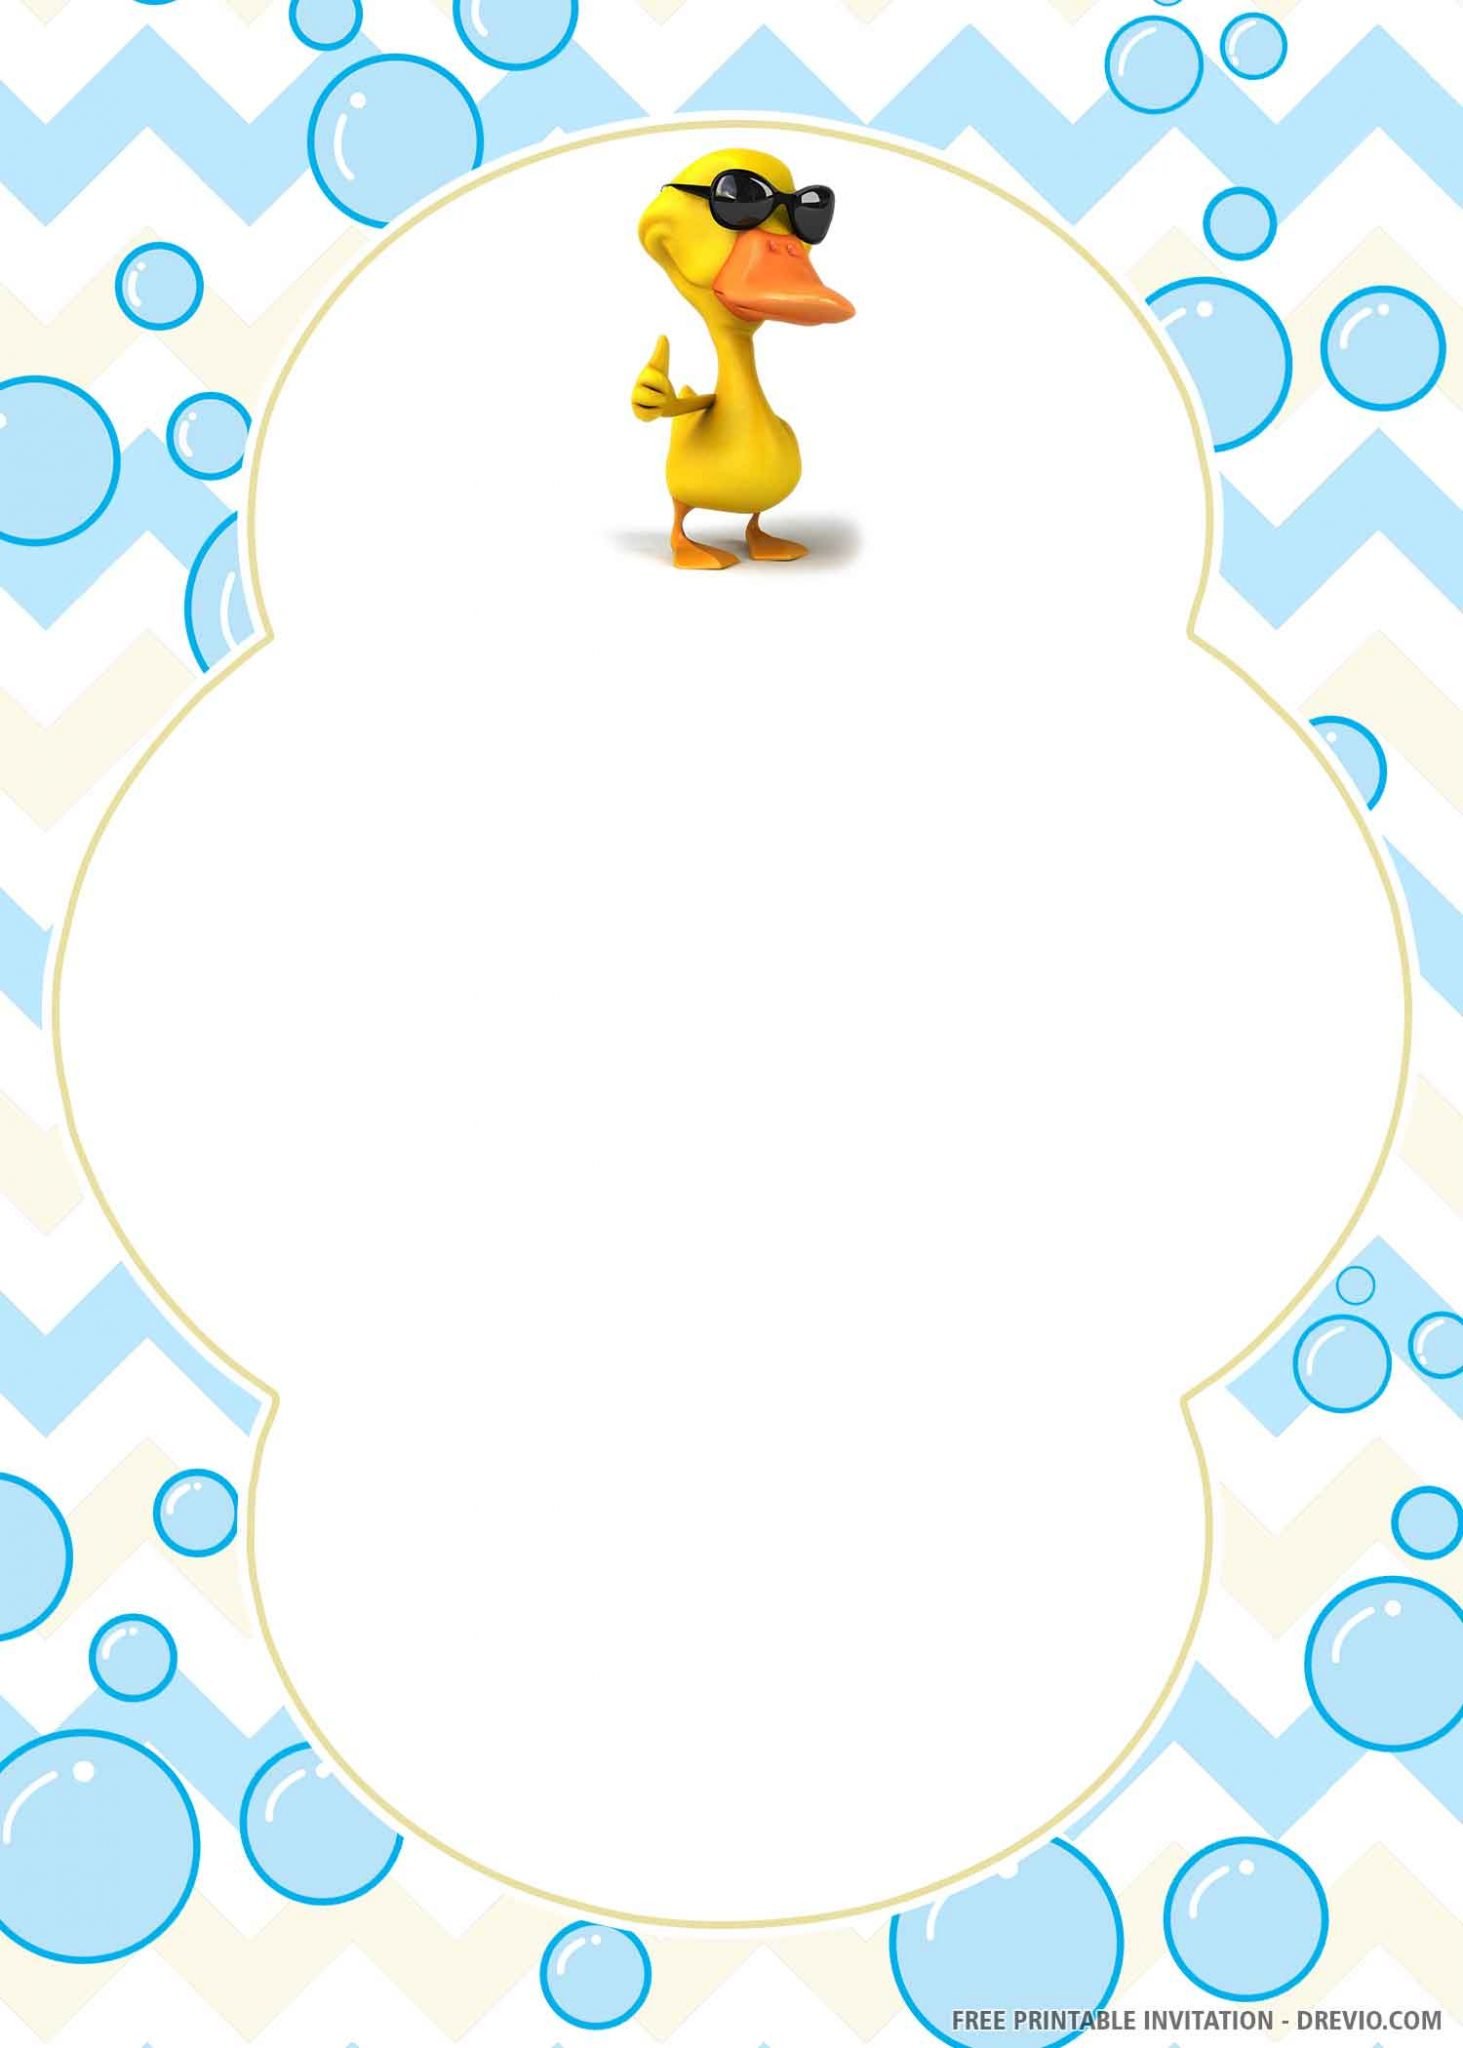 rubber-duck-baby-shower-invitations-download-hundreds-free-printable